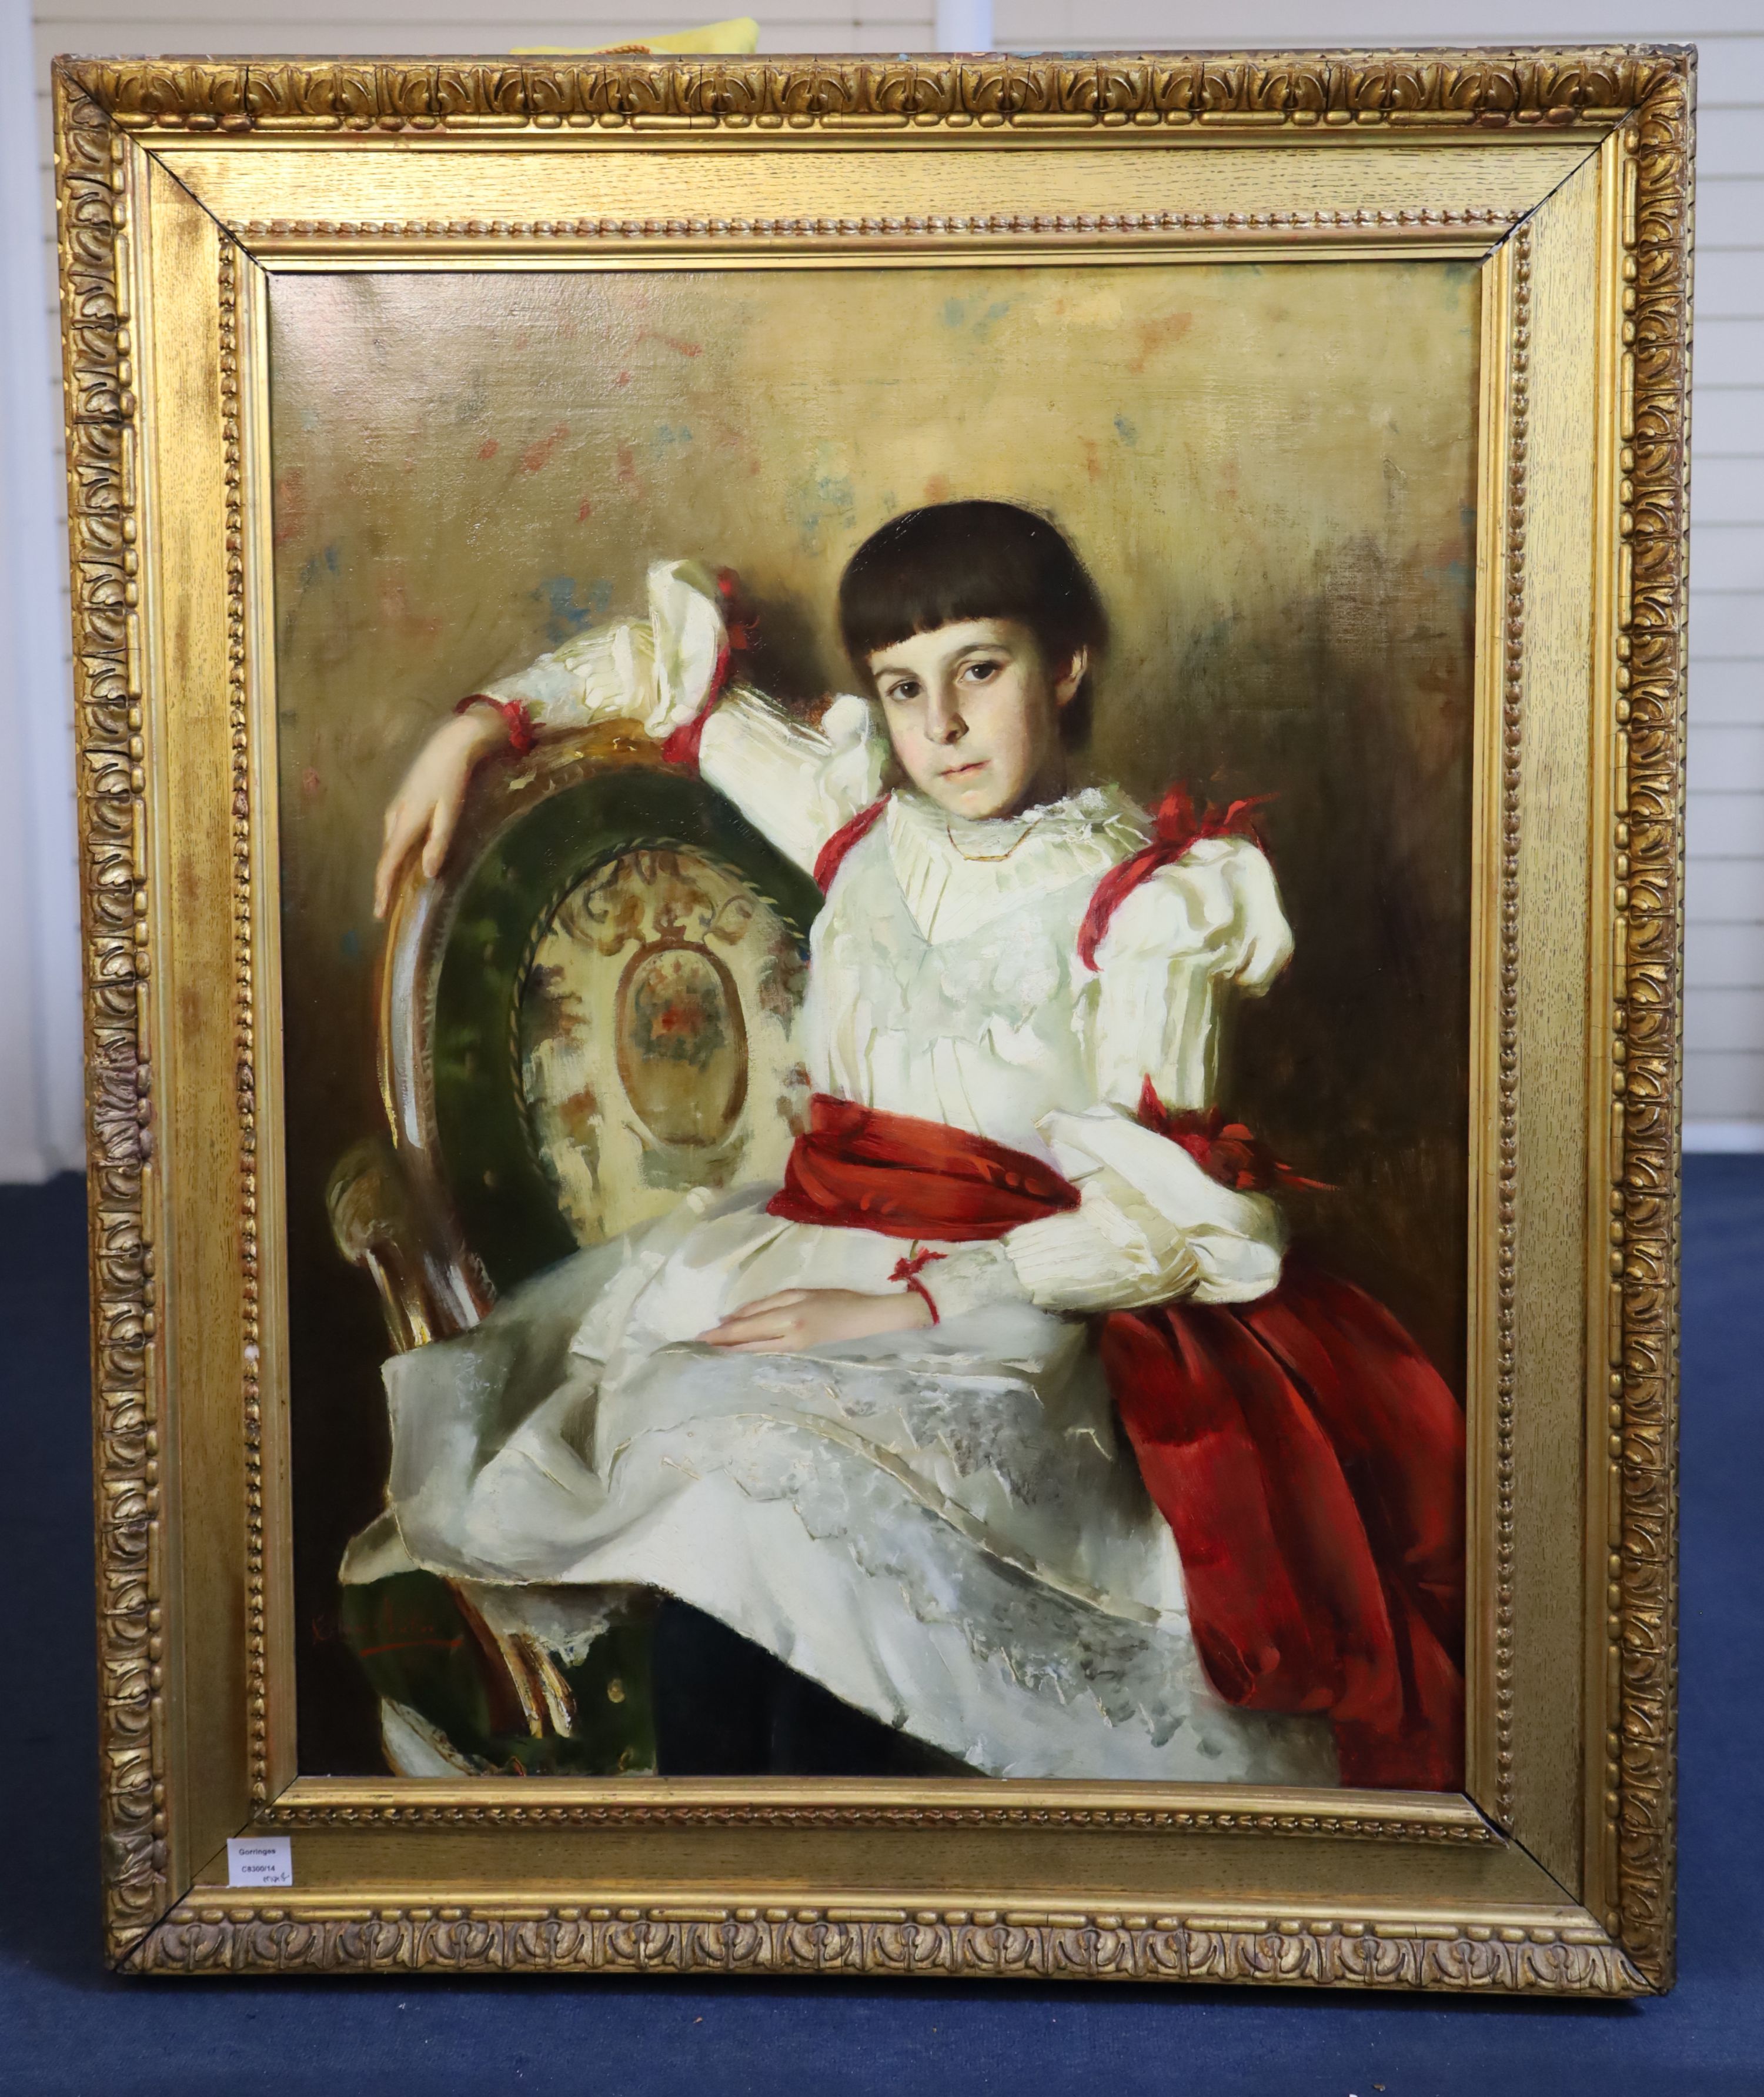 Clara Muller (19th C.), Portrait of a girl seated upon an armchair, oil on canvas, 73.5 x 94cm